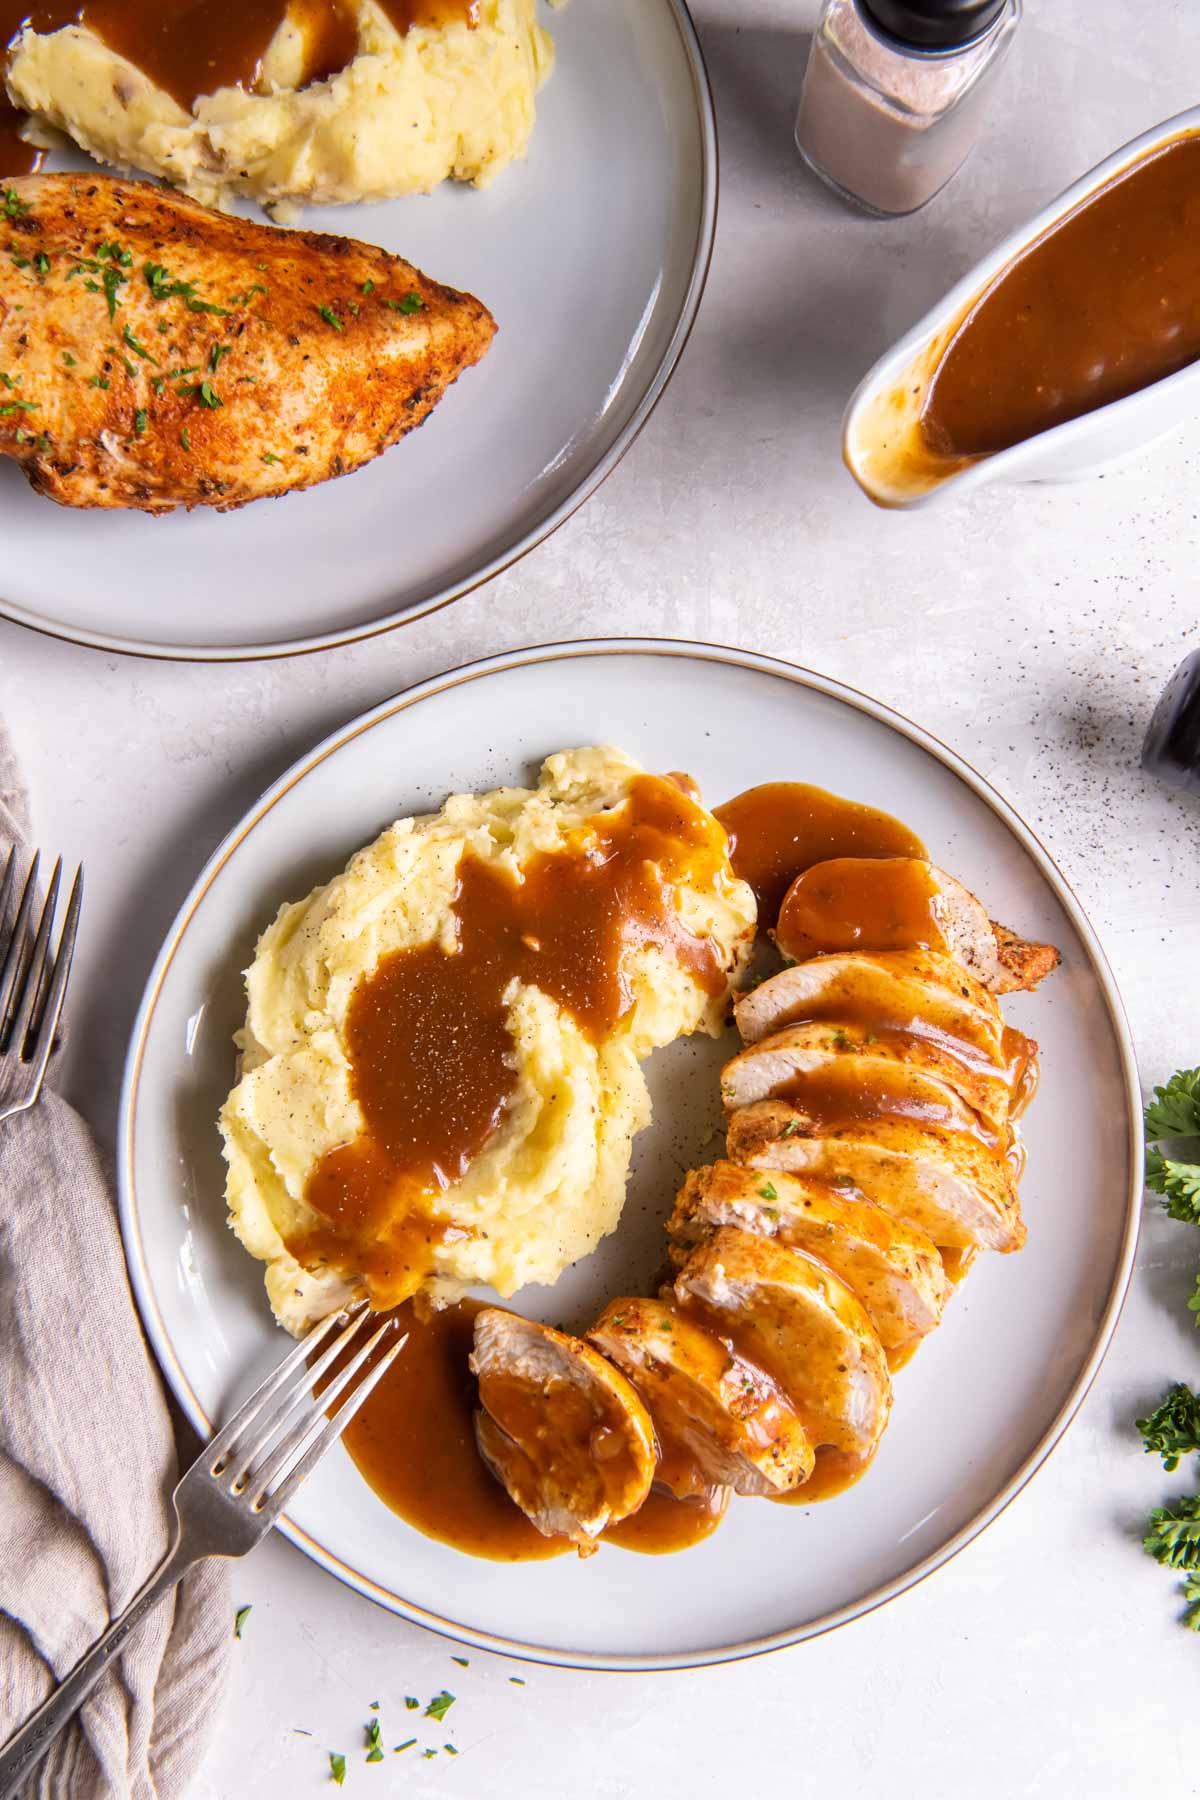 Juicy instant pot chicken breasts served with gravy and mashed potatoes.